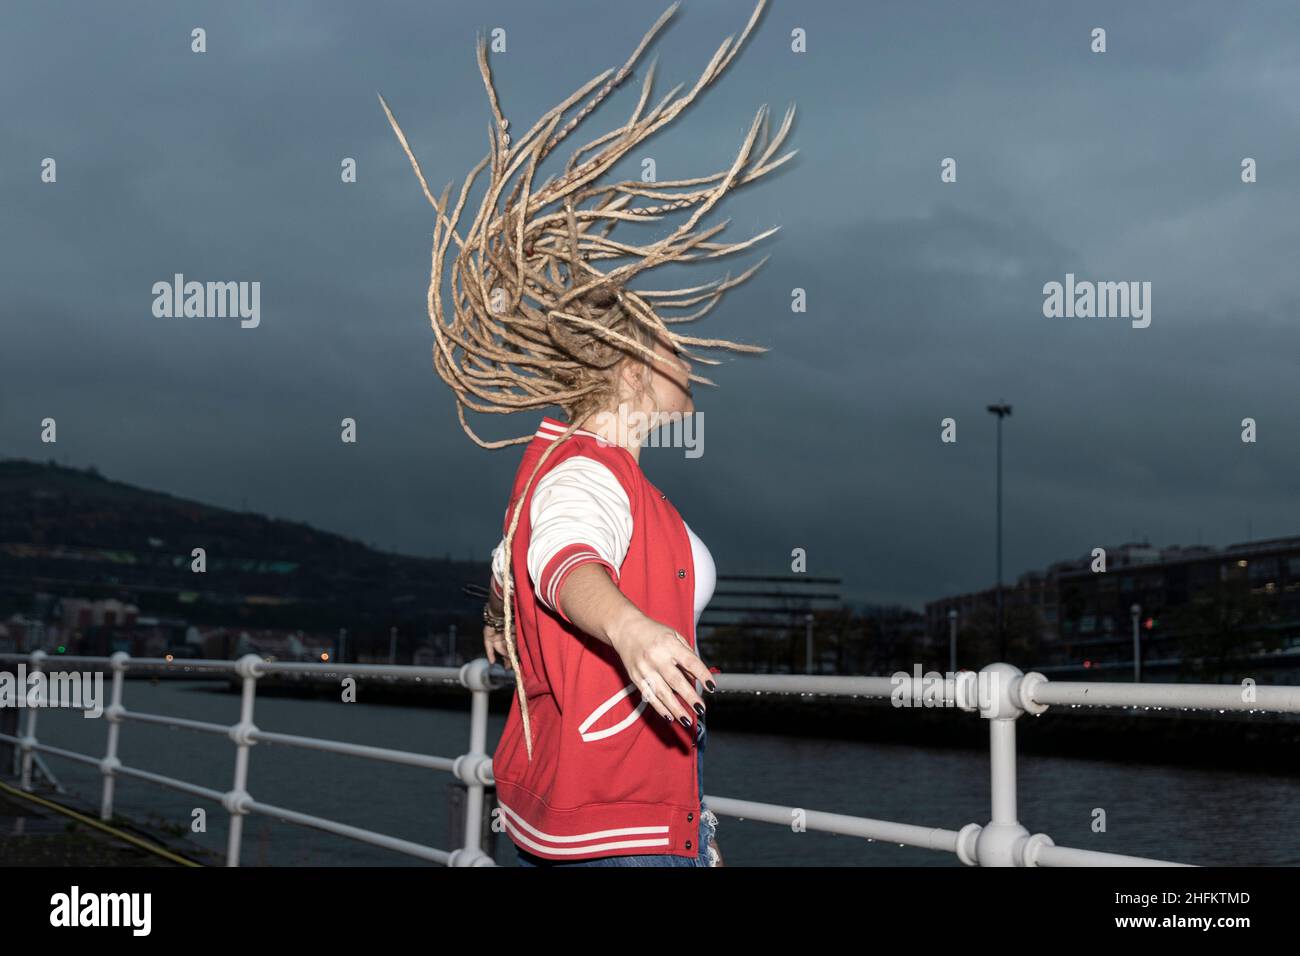 blonde woman with dreadlocks wagging her hair Stock Photo